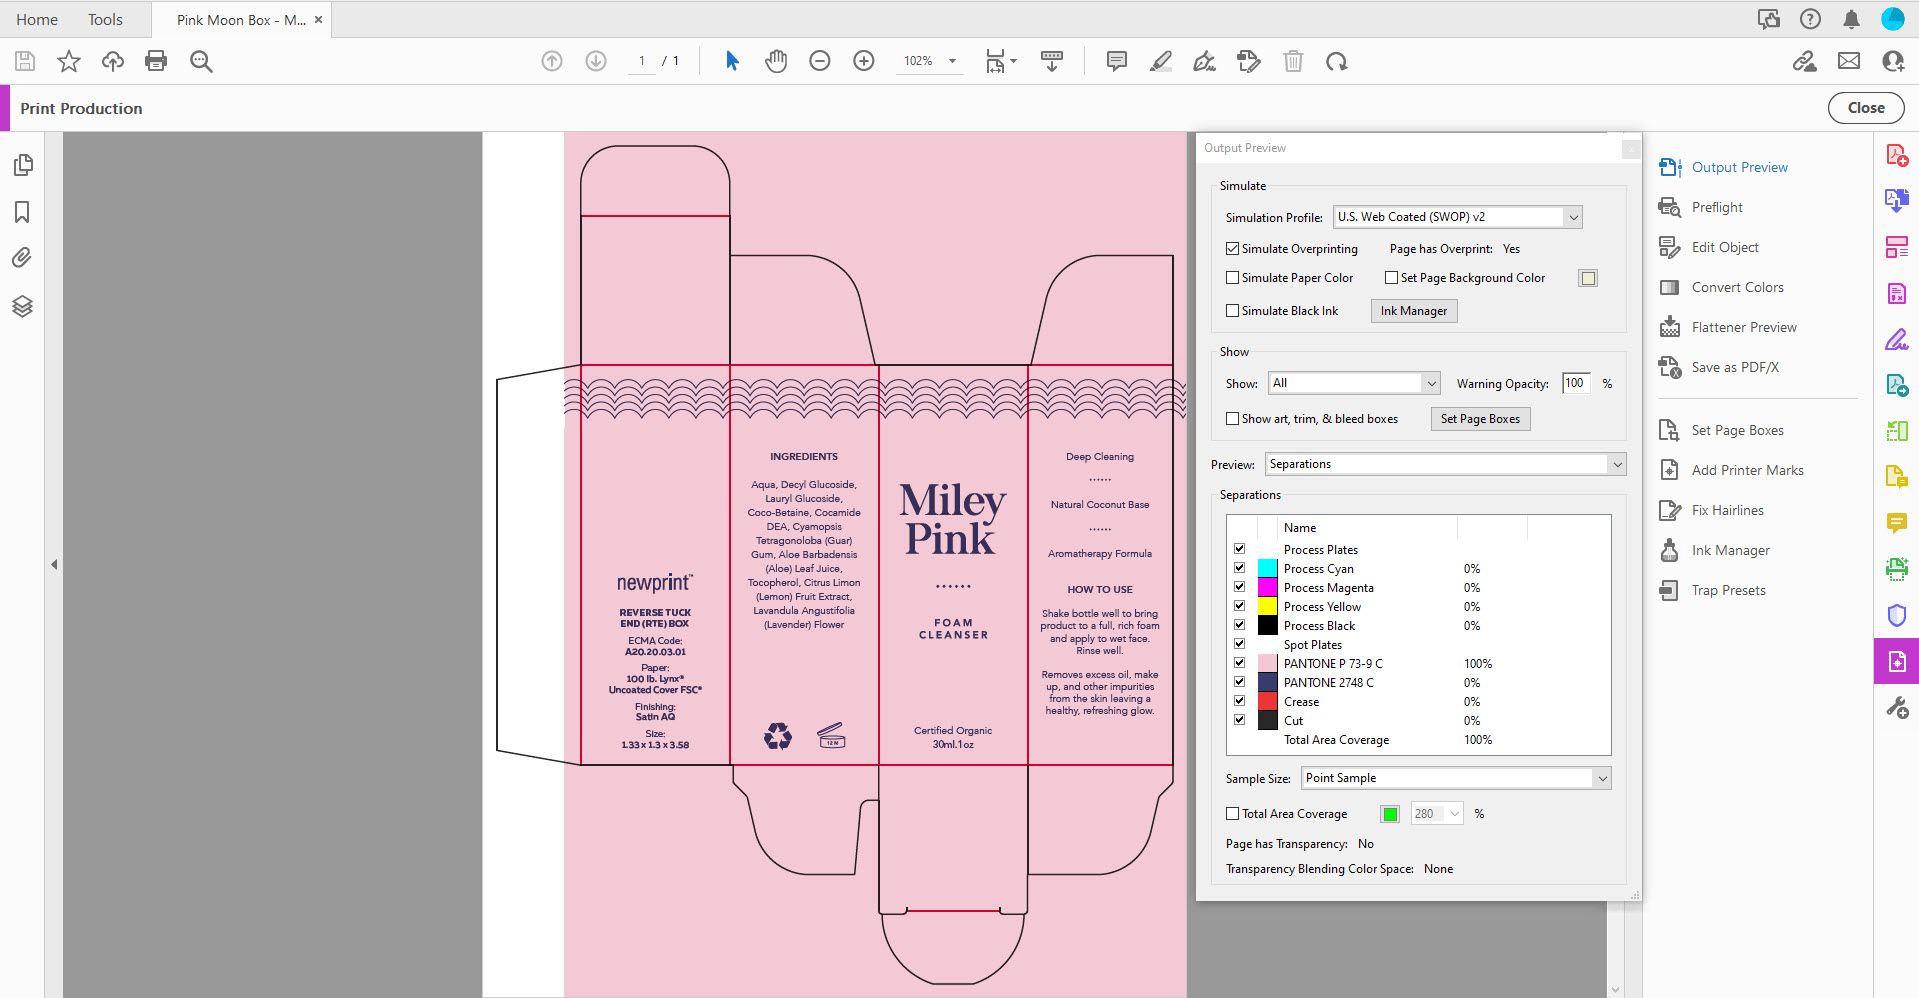 A screen shot of a box design in Adobe Acrobat showing the spot colors used for the design, spot color vs CMYK.